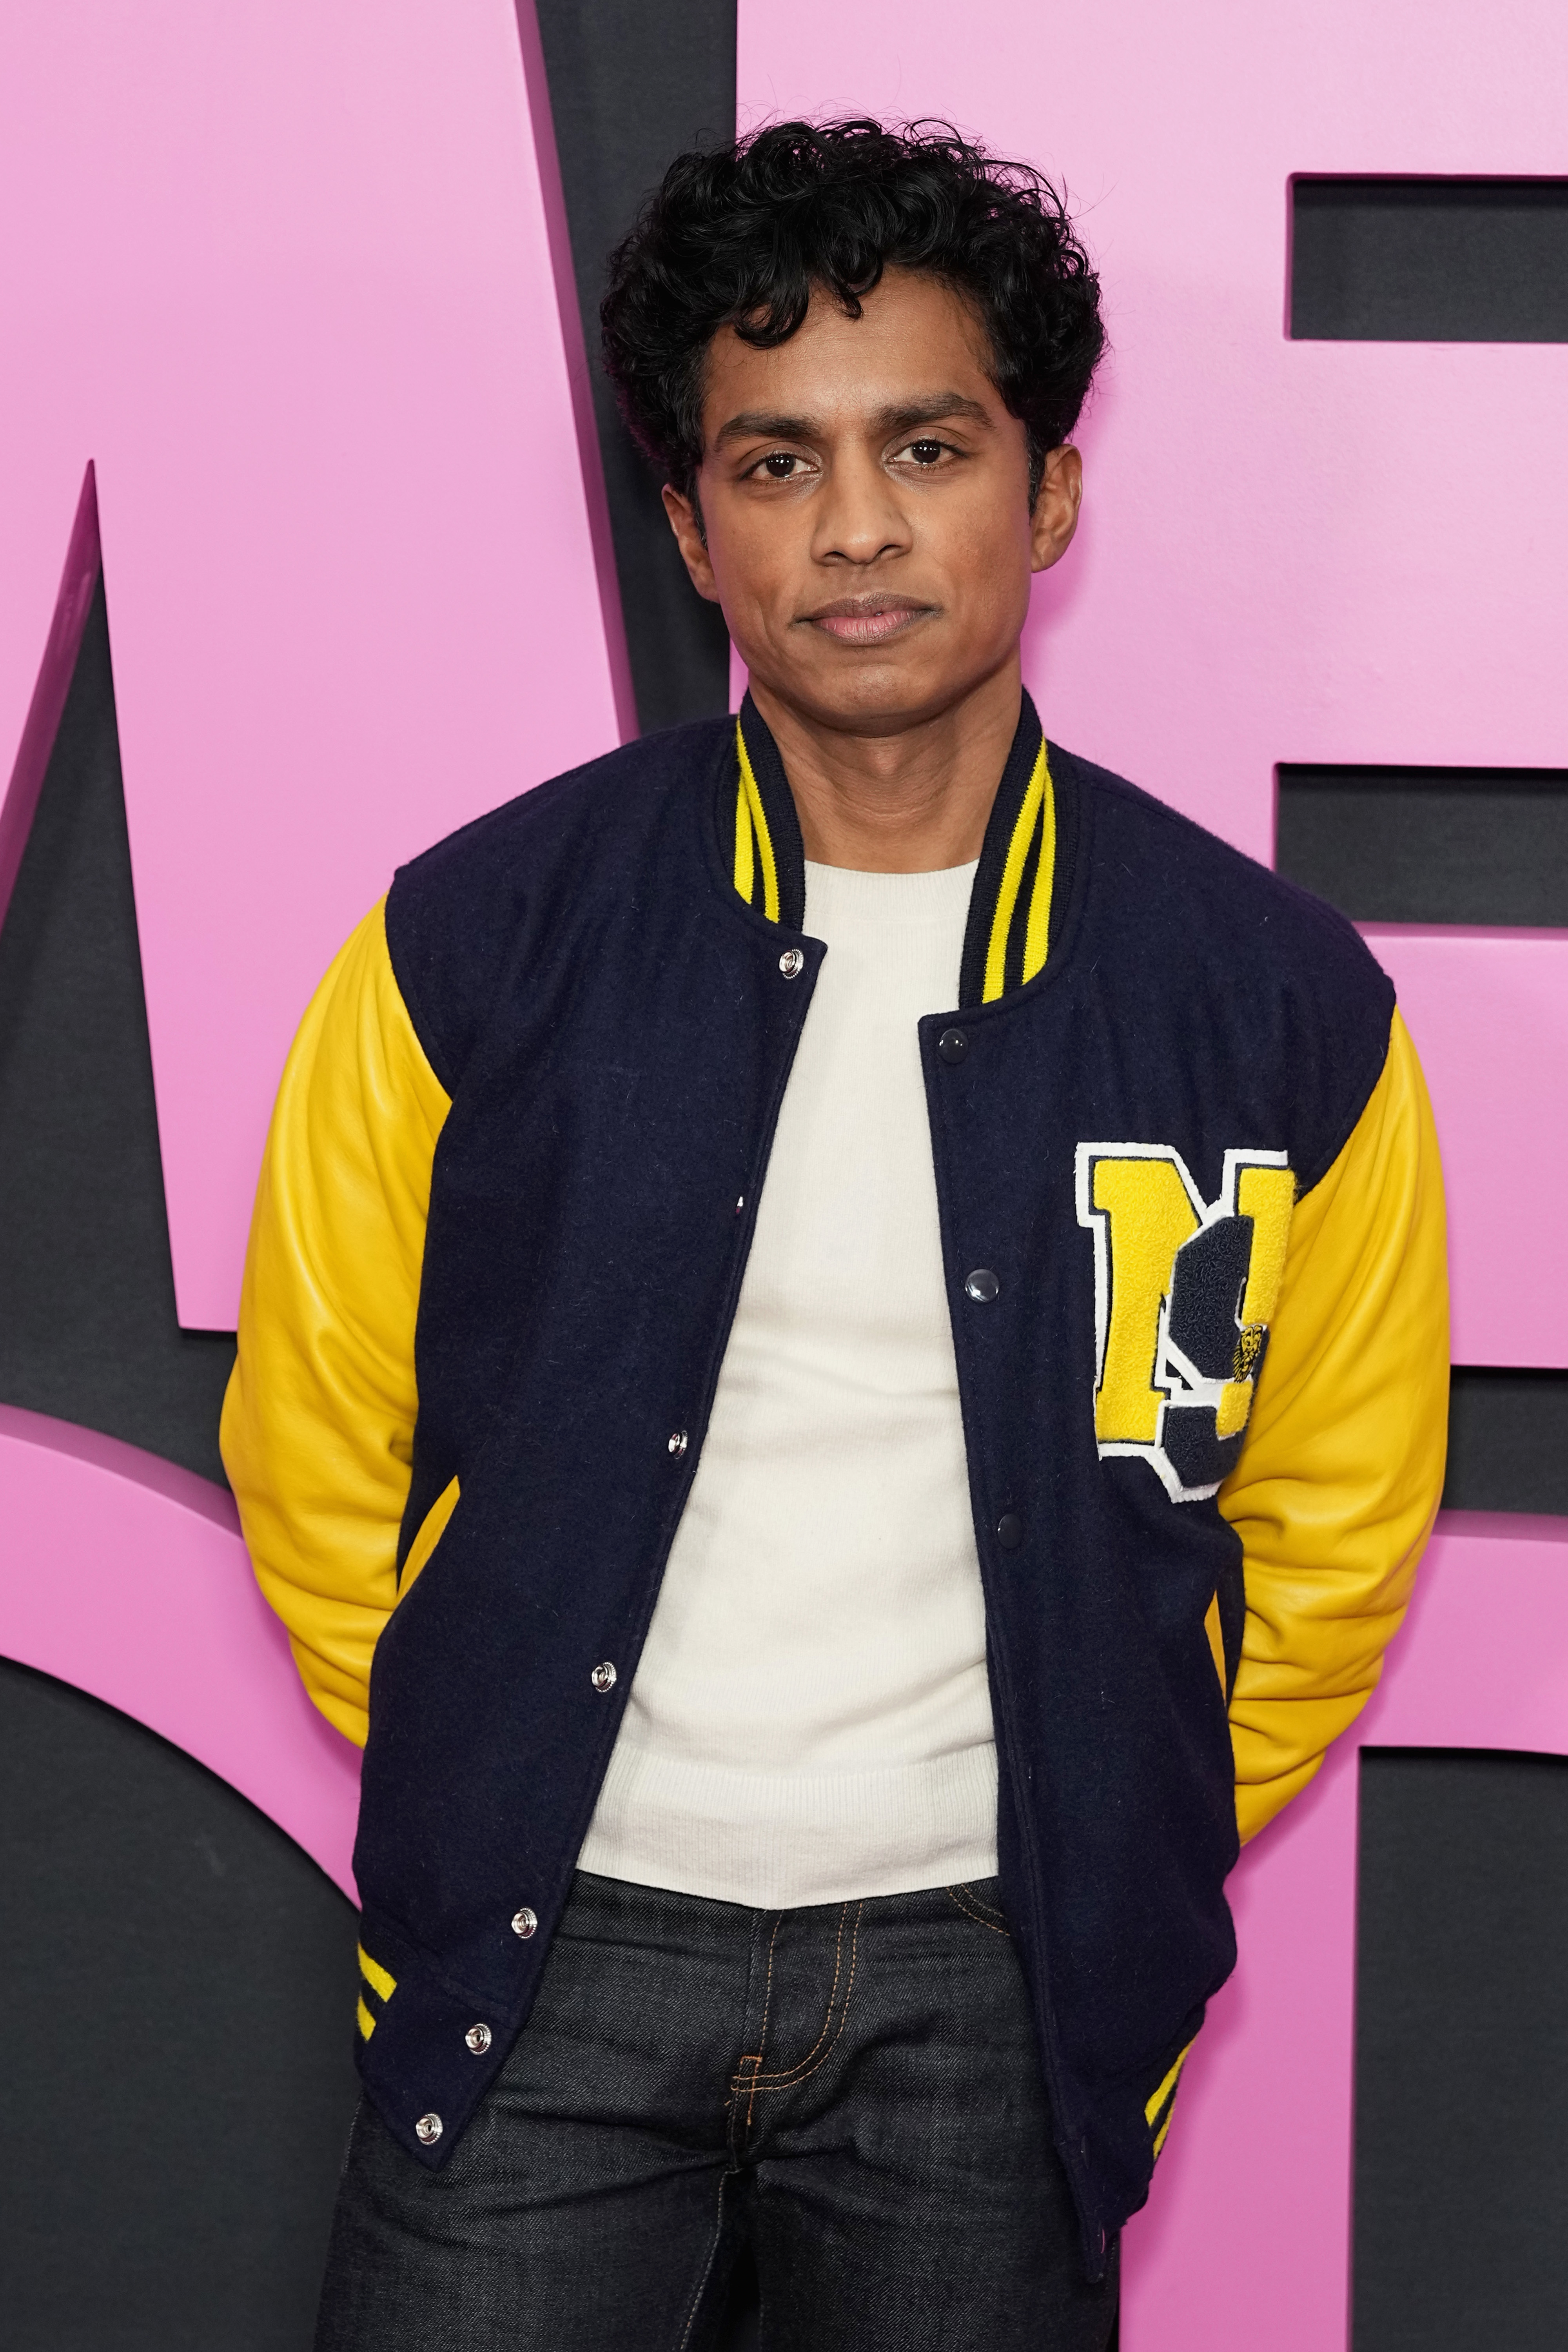 he&#x27;s wearing the school letterman at the movie premiere